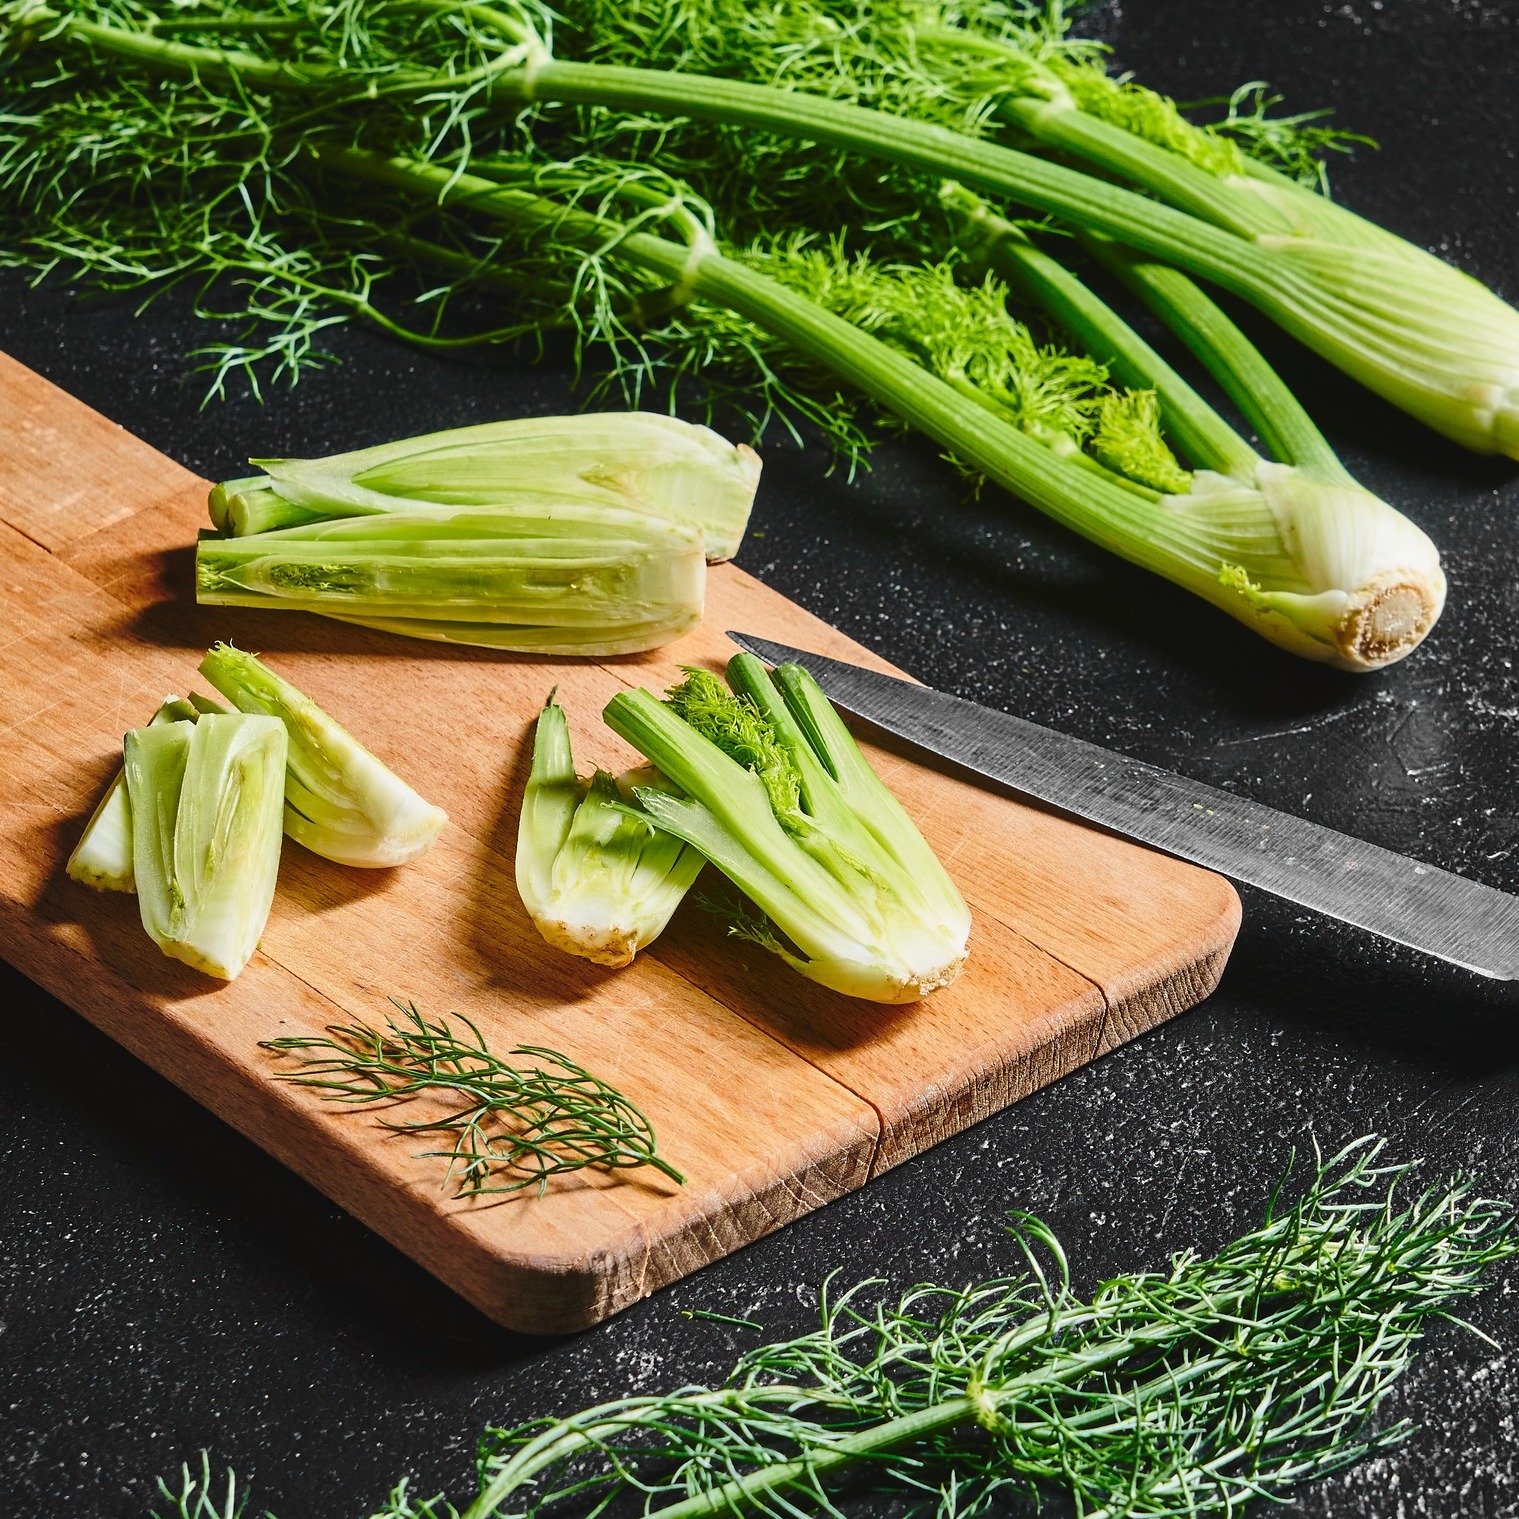 @babe_farms is a premier grower/shipper of specialty vegetables. 
Farm Catalogue linked in the bio. 
Check out their specialty items in stock at Get Fresh:
Baby Fennel, 24ct, item 4440
Blonde Frisee, 12ct, item 3644
Bok Choy, 30lb, item 2740
Lolla Ro